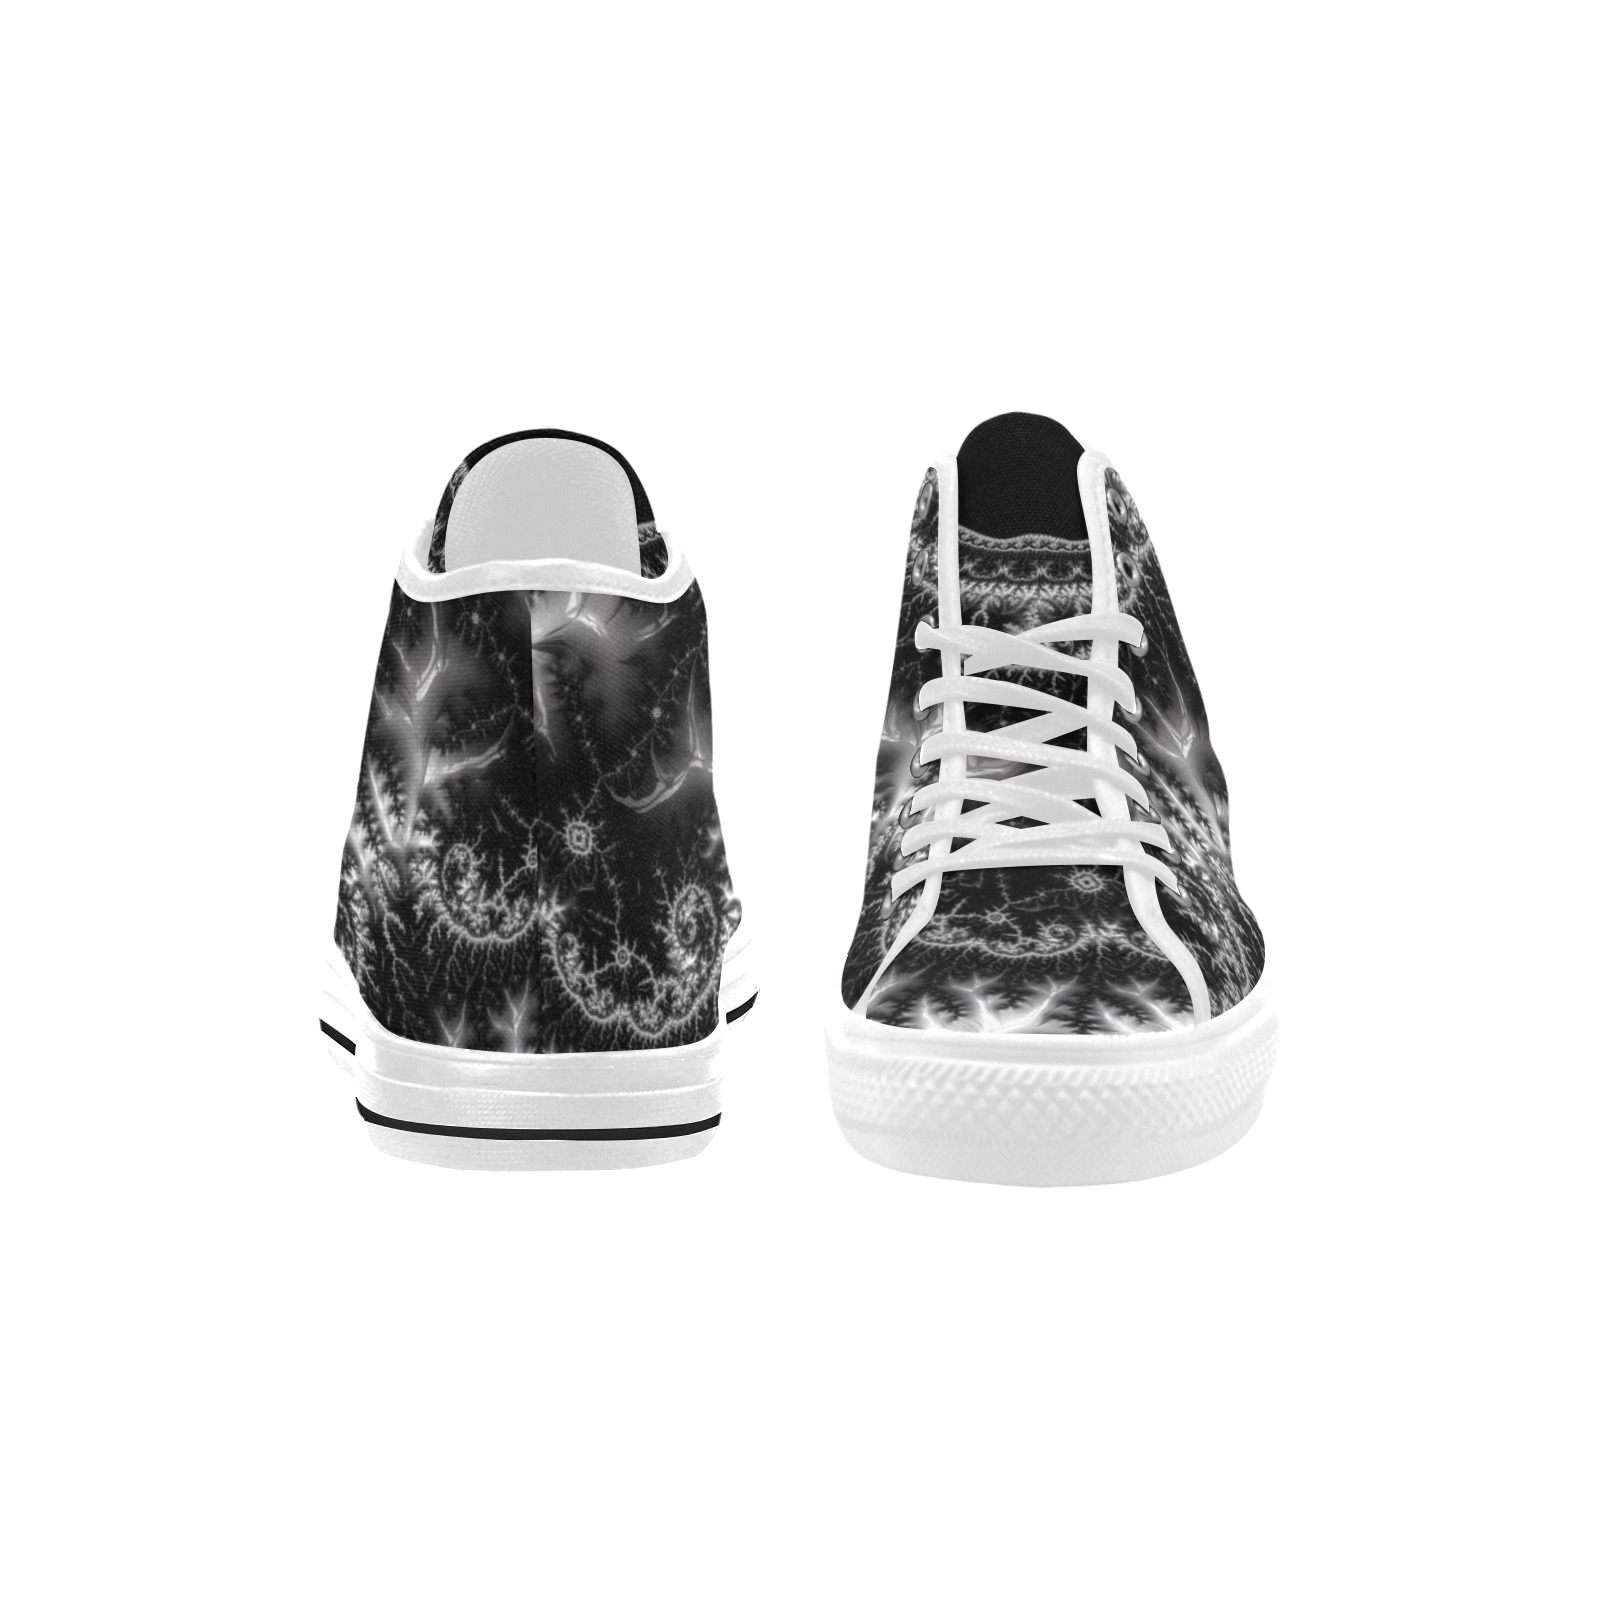 Silver Lace Collar Fractal Abstract Vancouver H Women's Canvas Shoes (1013-1)